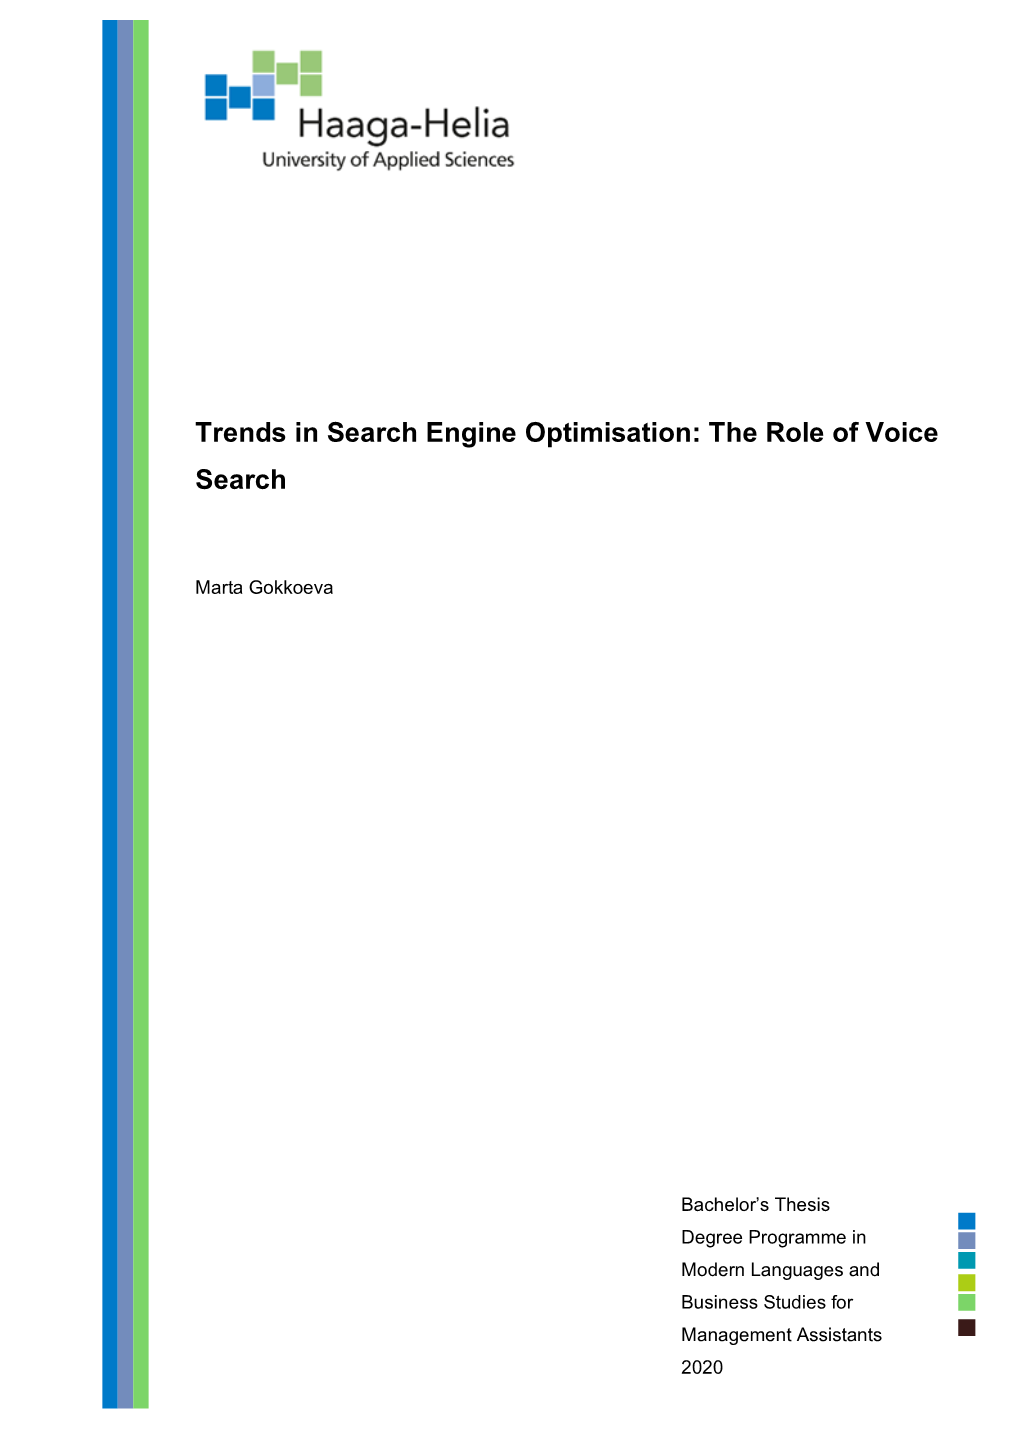 Trends in Search Engine Optimisation: the Role of Voice Search